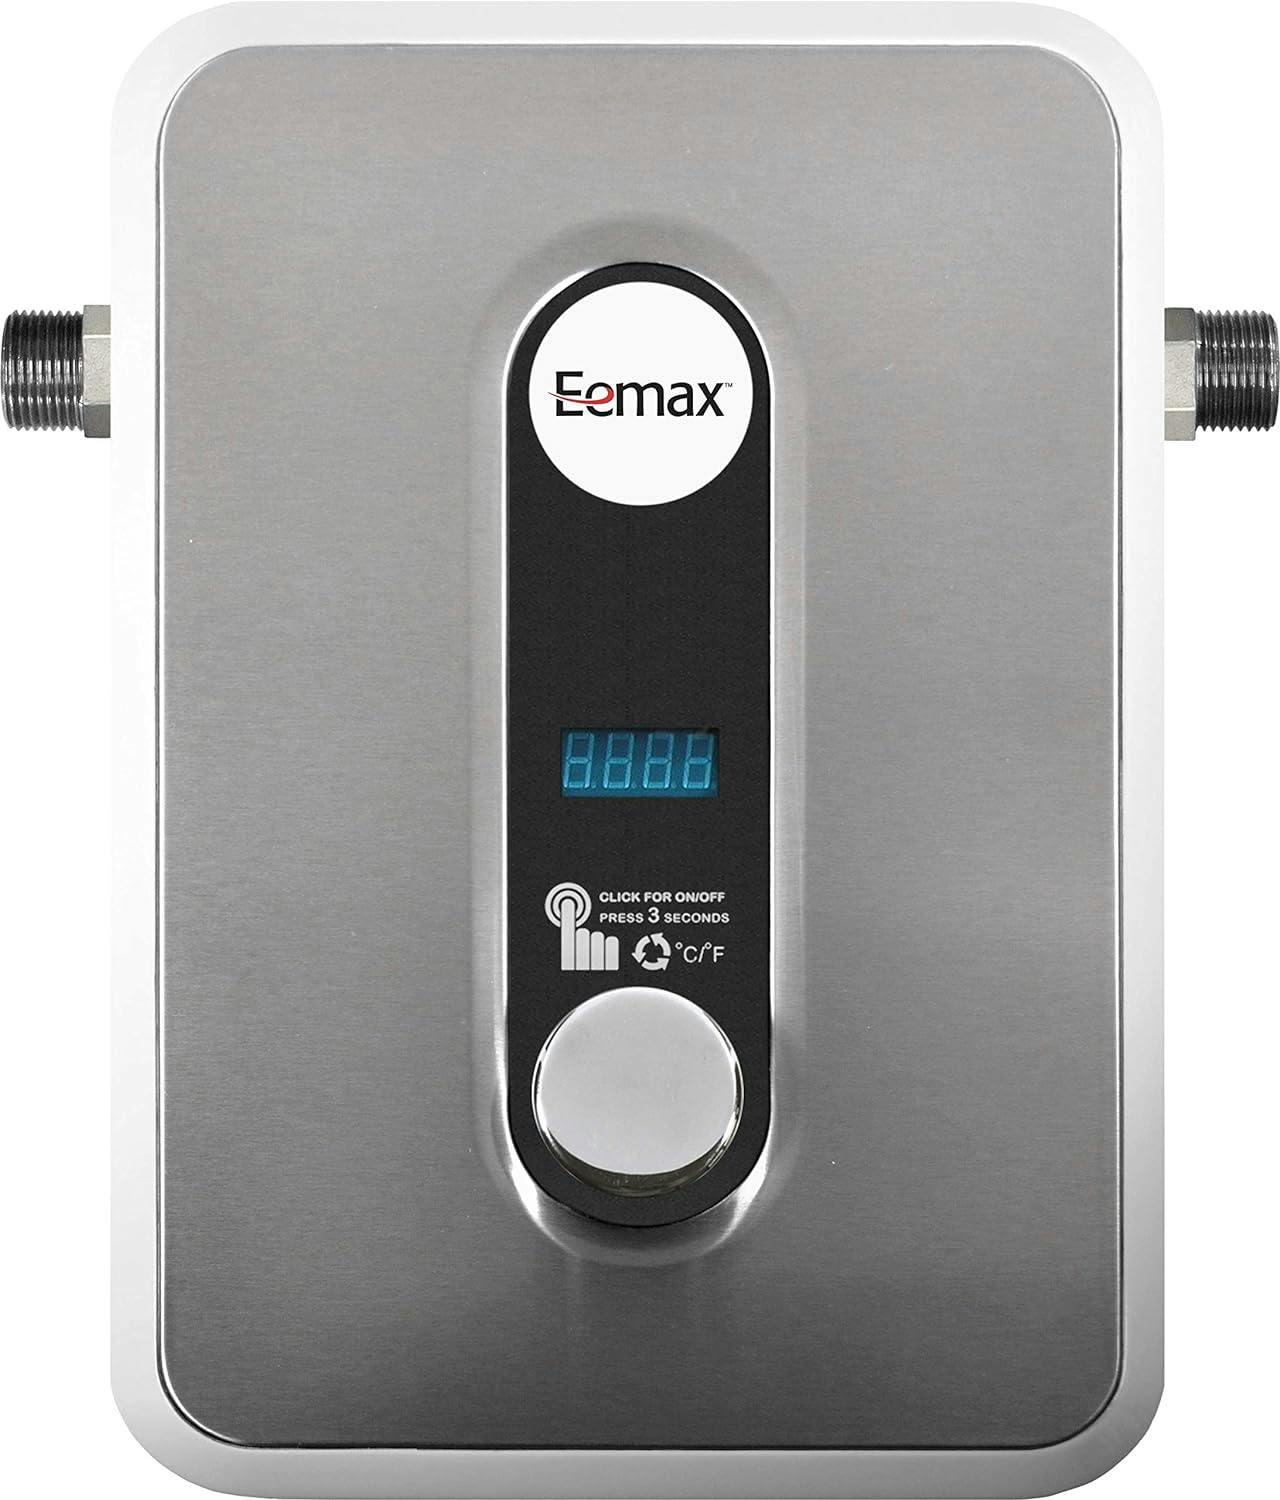 Eemax Compact Adjustable Electric Tankless Hot Water Heater